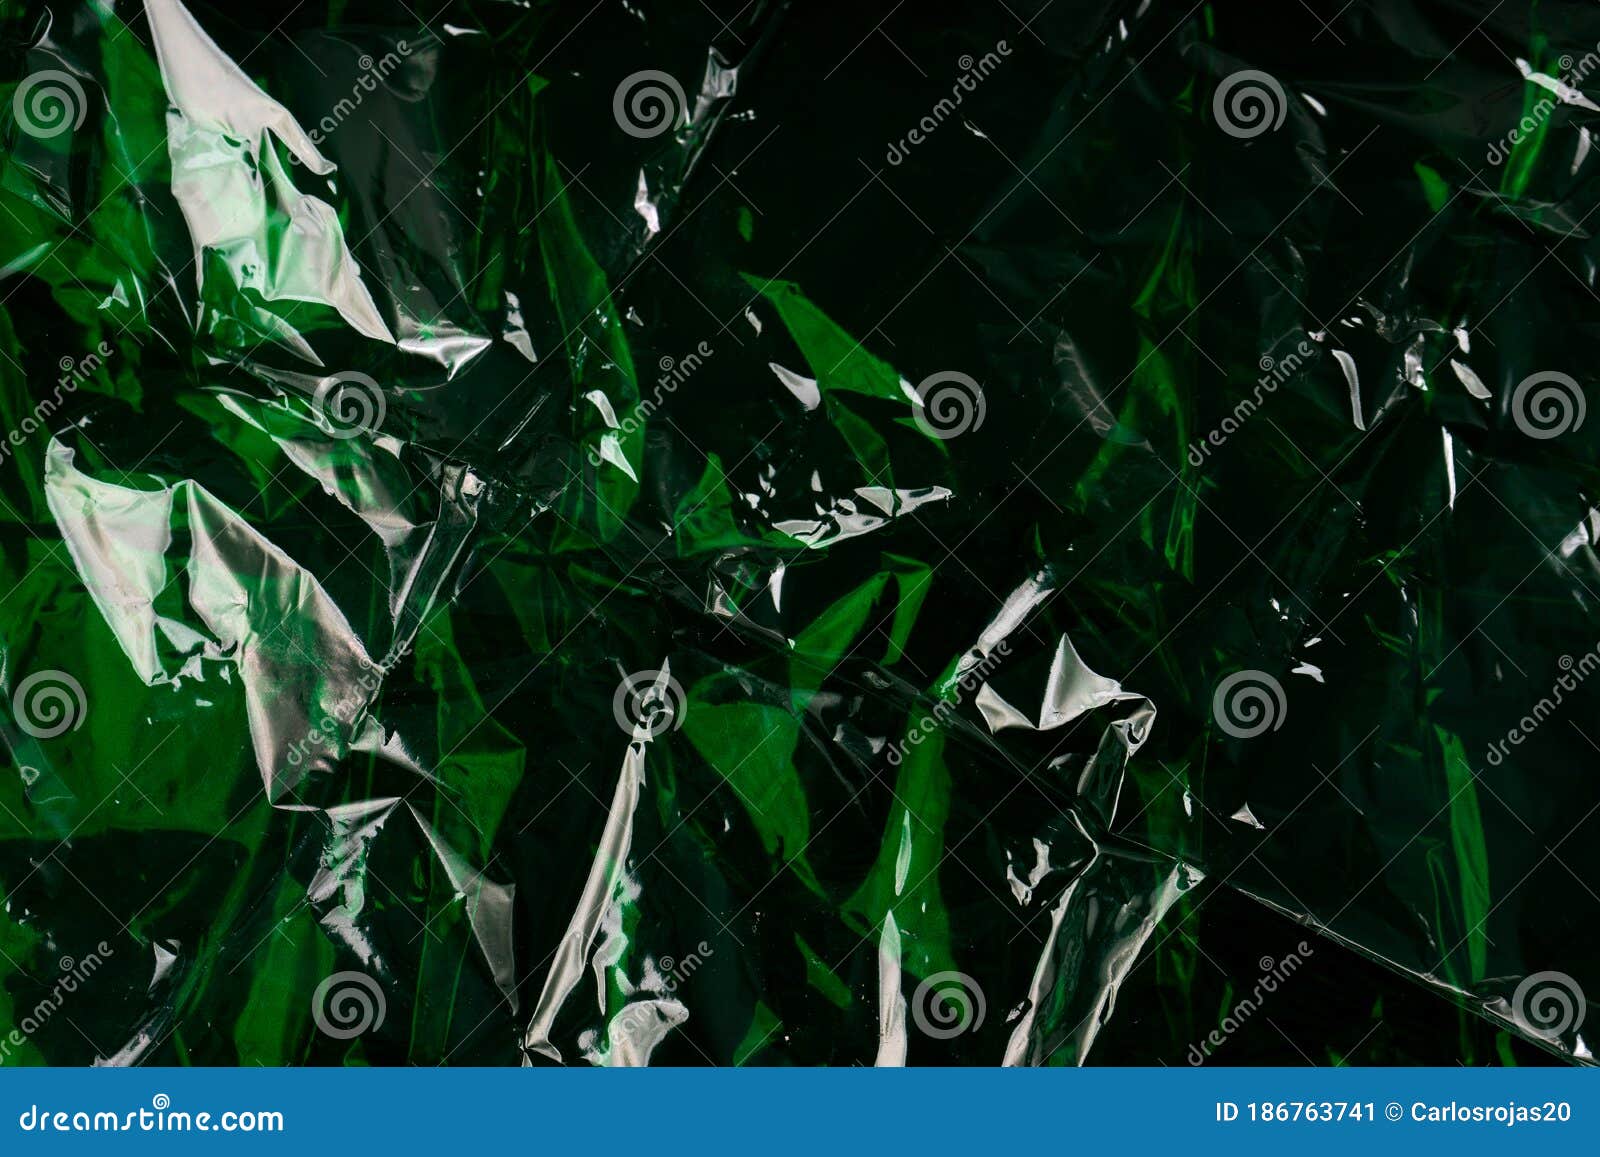 green cellophane paper background texture